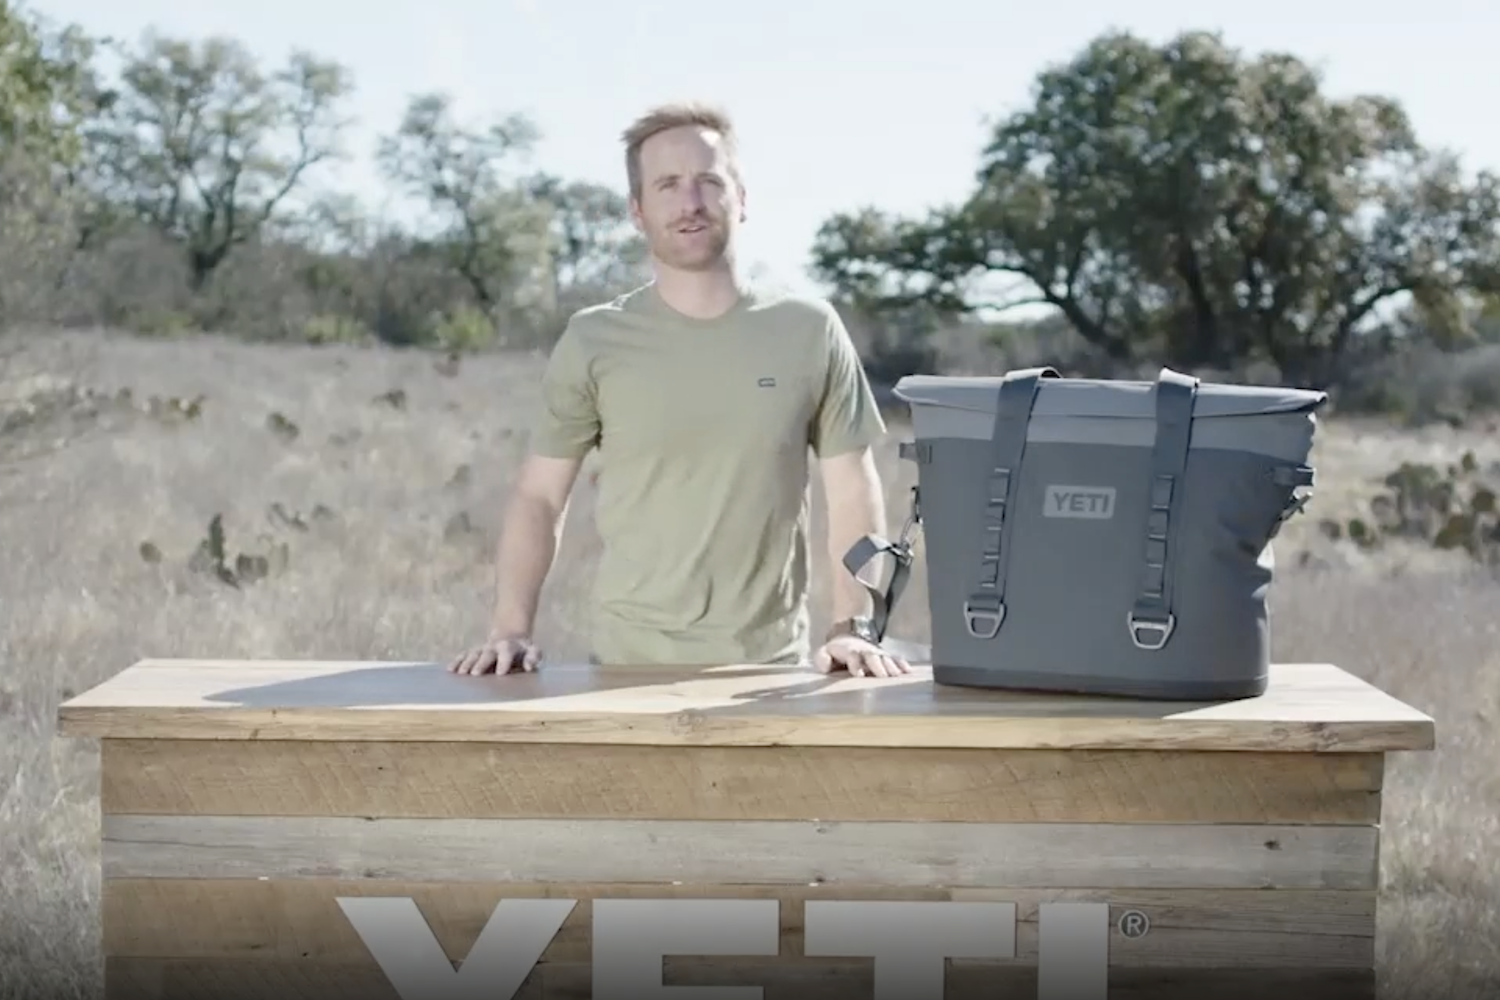 Magnet hazard reason behind Yeti coolers and cases recall